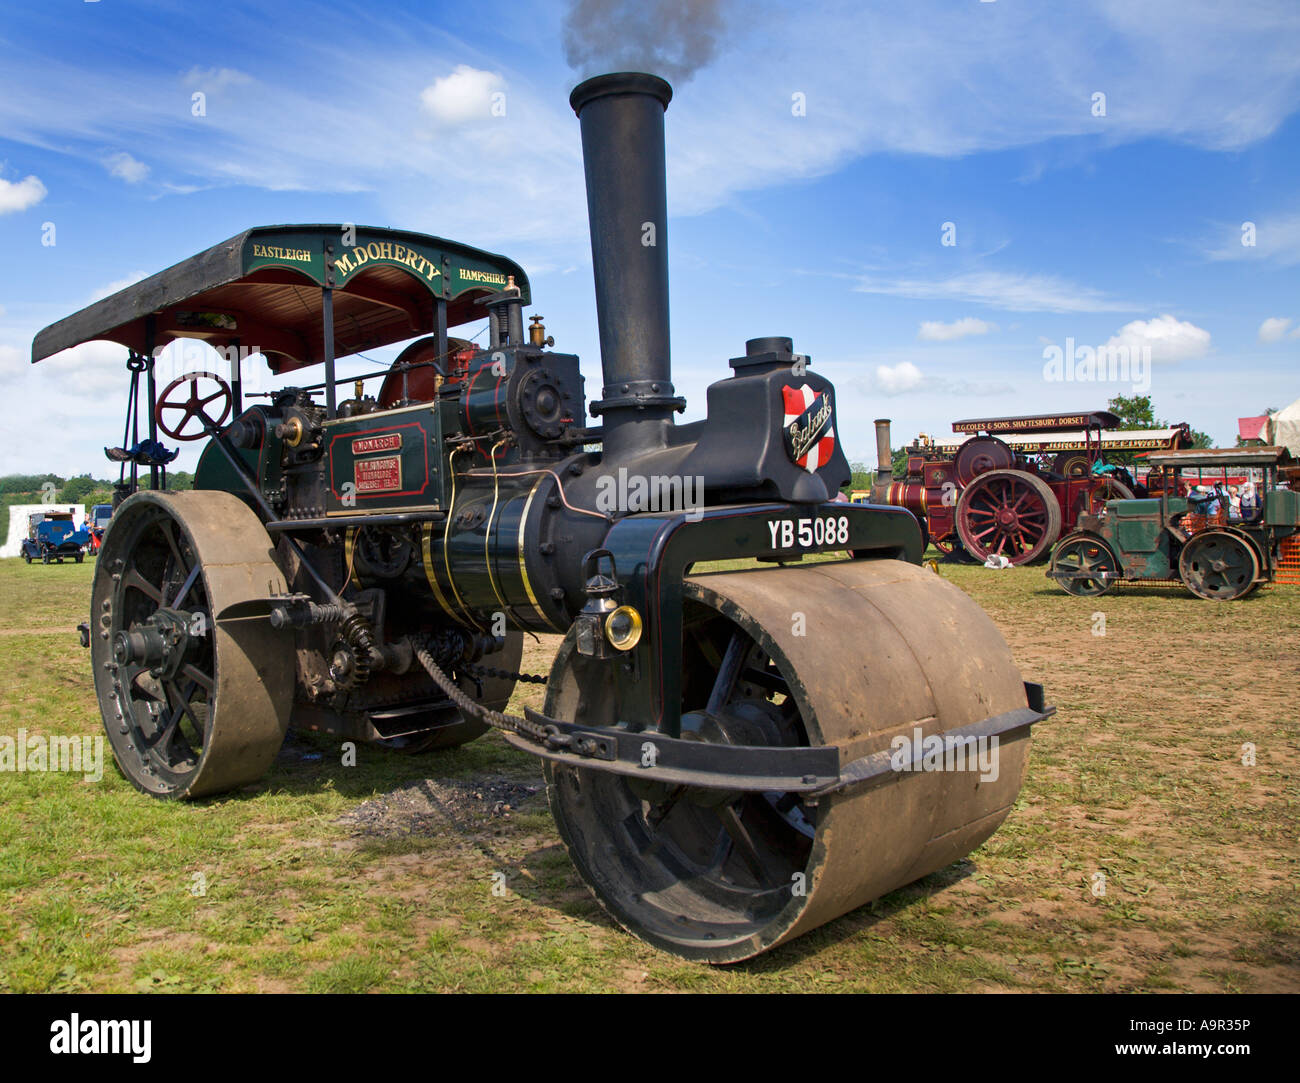 Steam Roller Monarch at a Steam Rally in, Hampshire, England Stock Photo